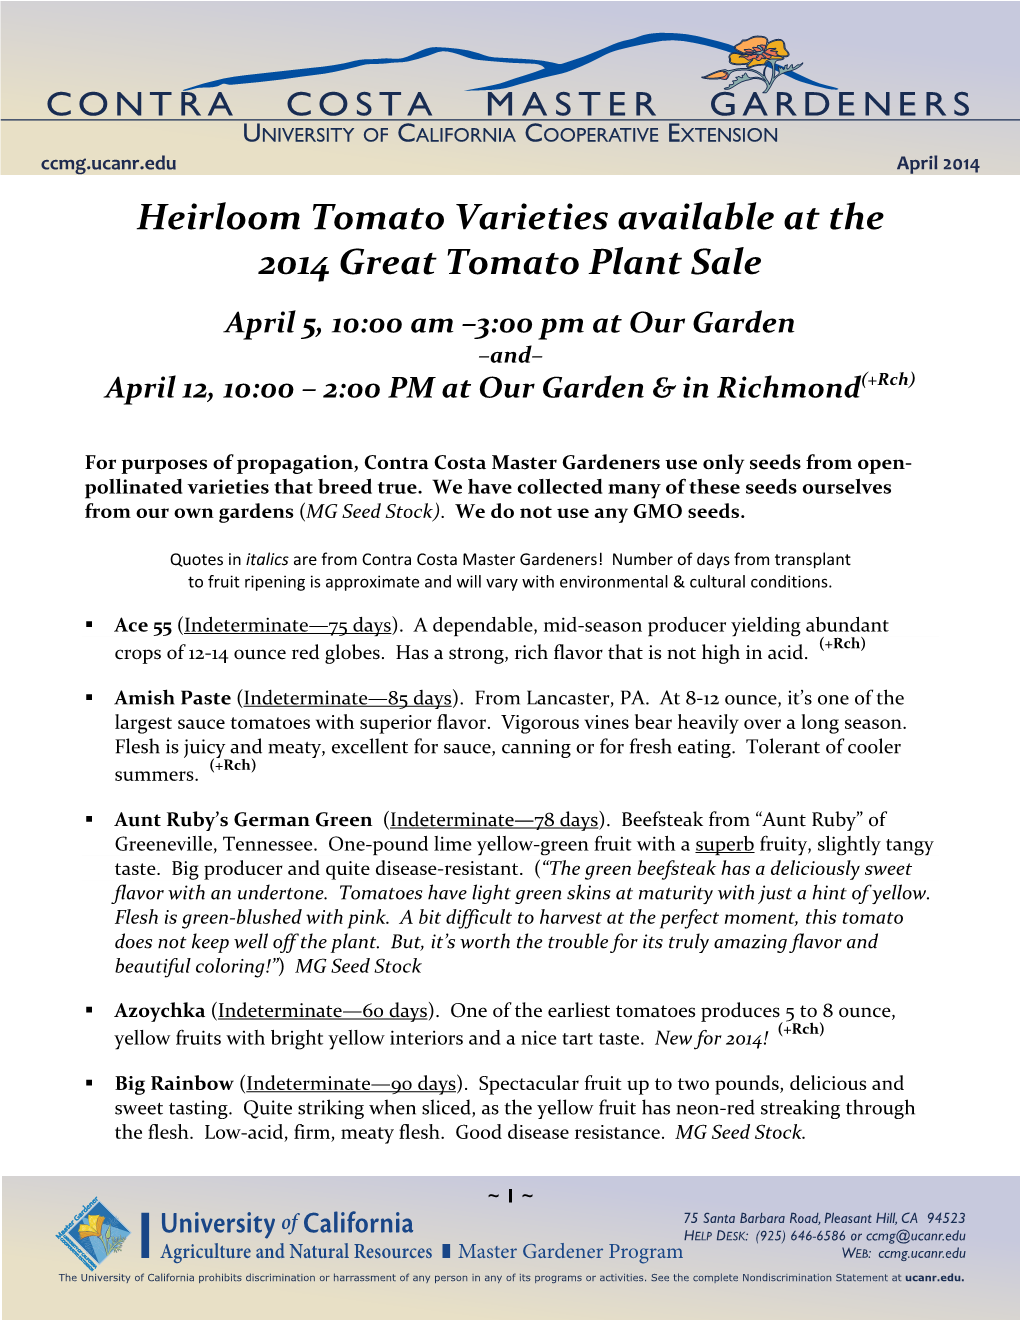 Heirloom Tomato Varieties Available at the 2014 Great Tomato Plant Sale